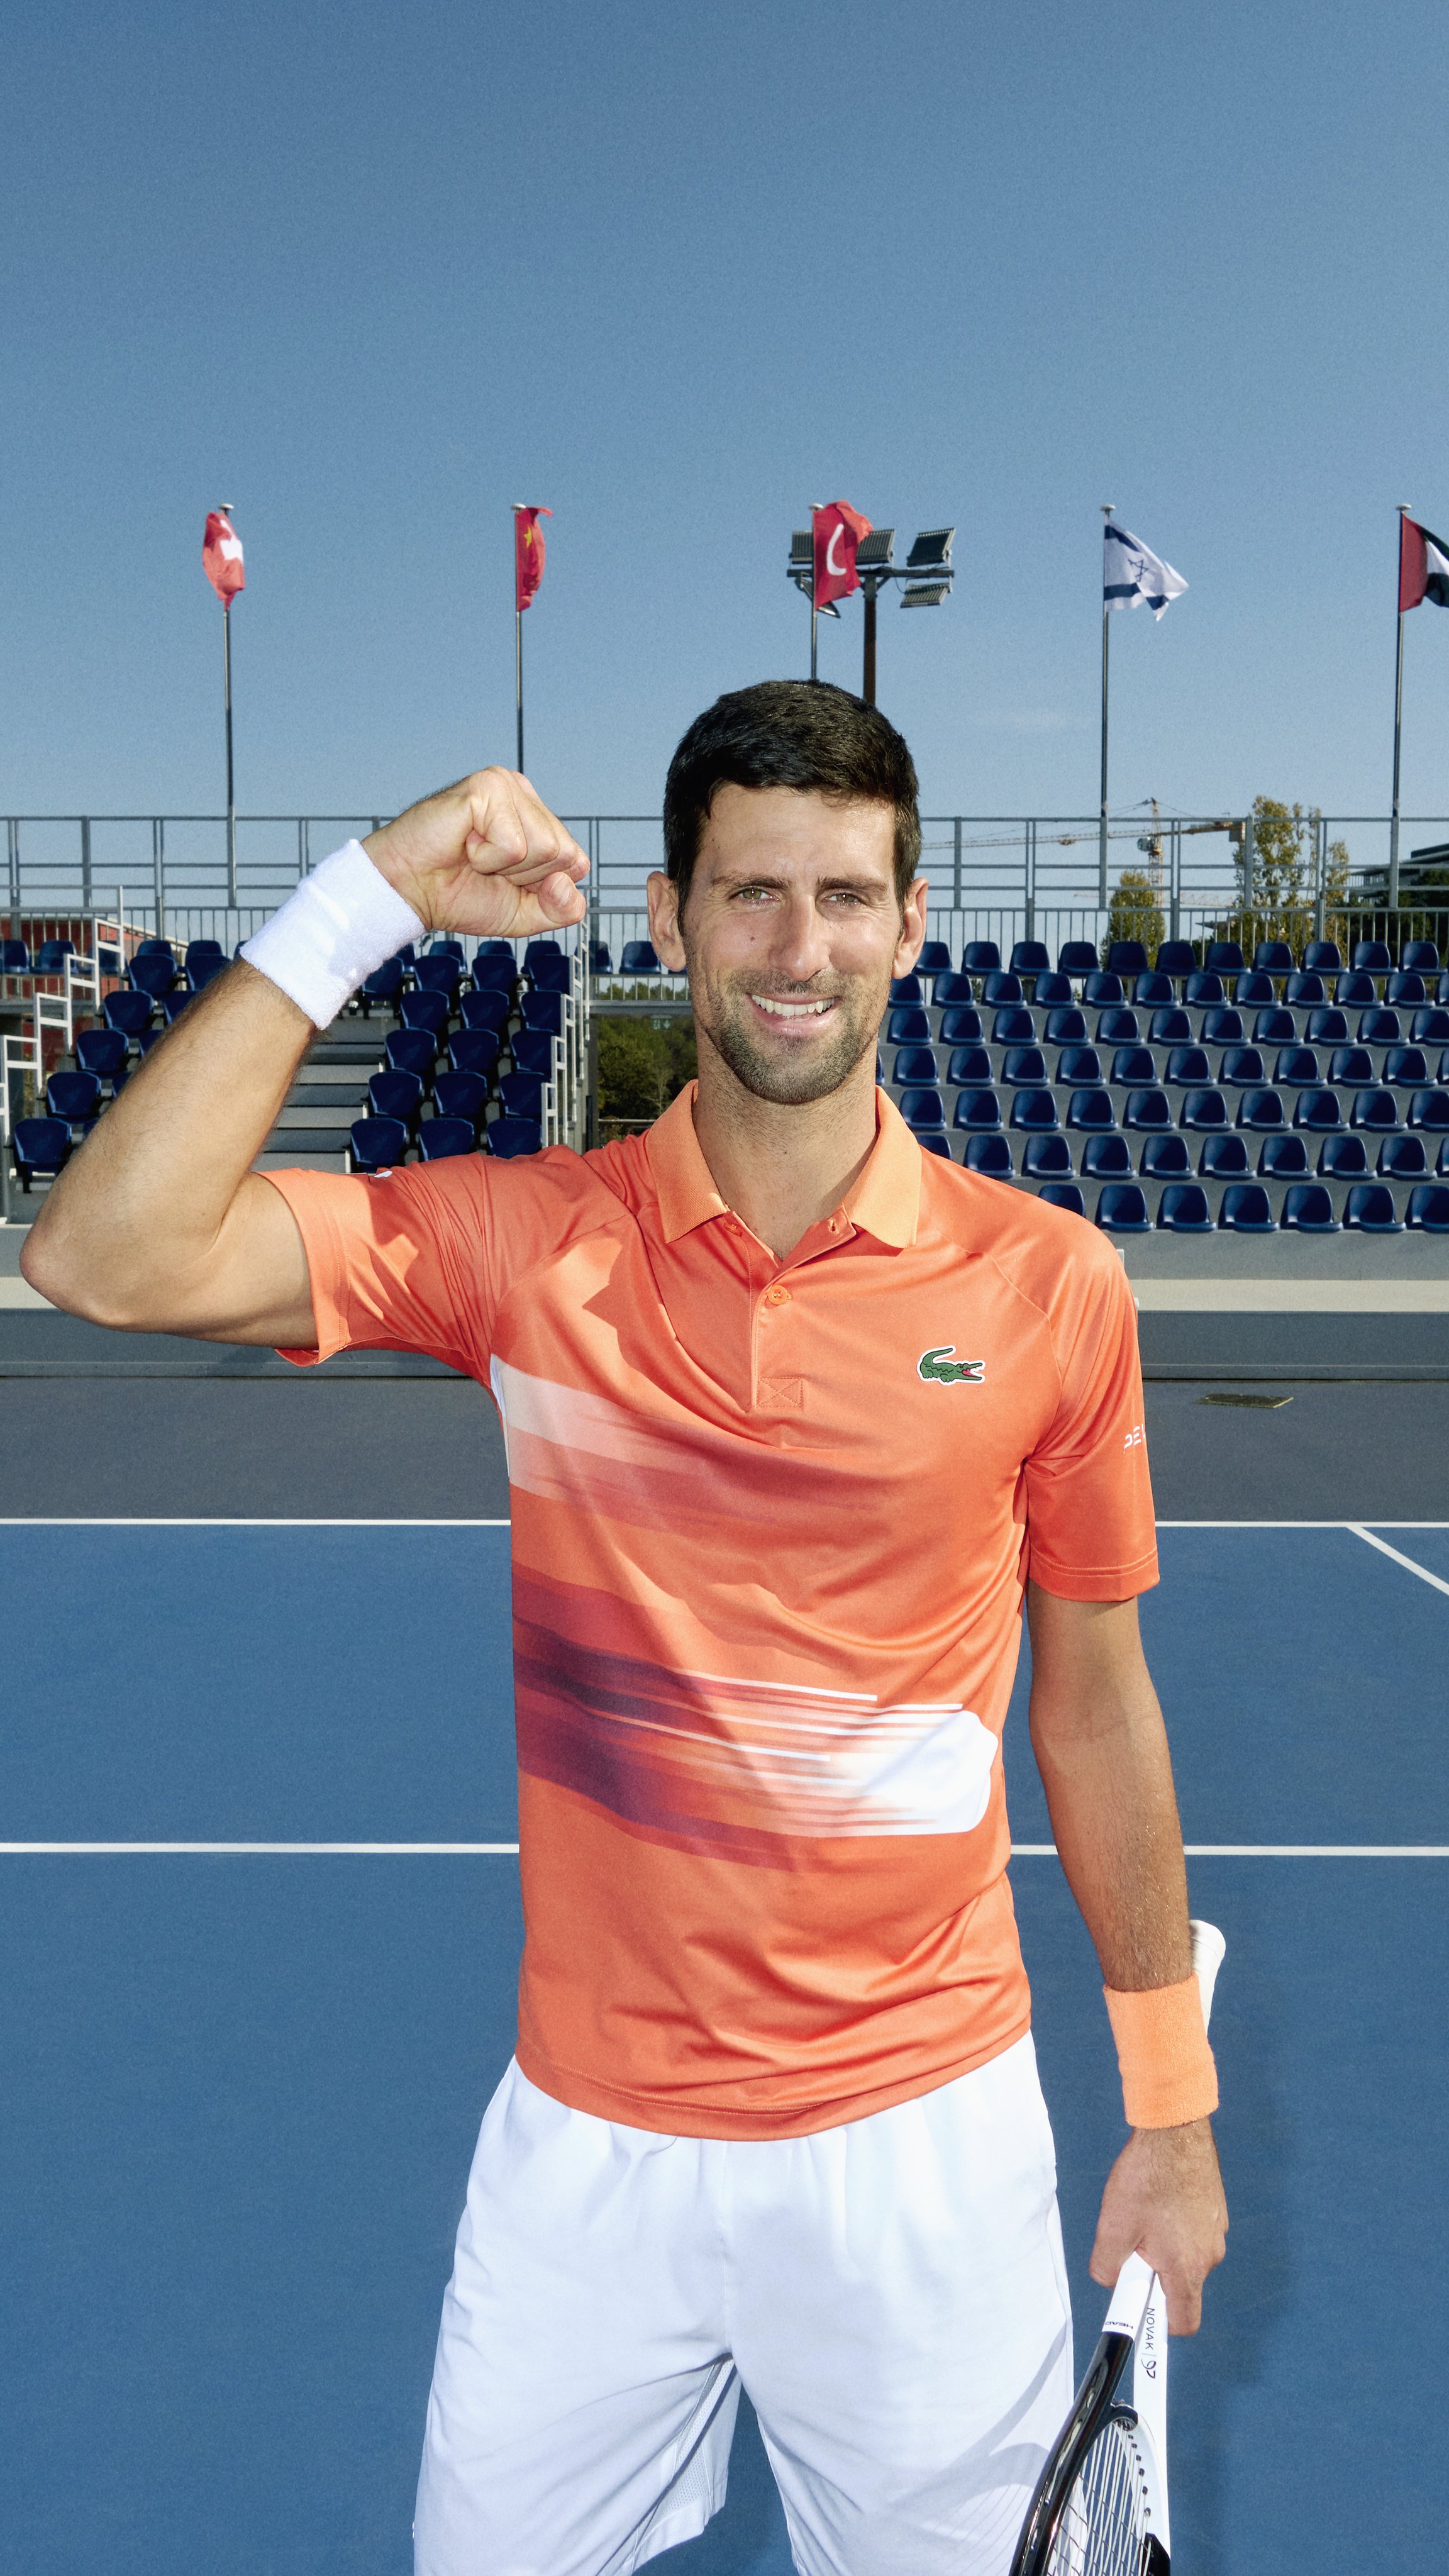 Land studie klap Lacoste on X: "Drawing its inspiration from the speed of tennis balls, the  @DjokerNole collection has everything you need to go beyond your limits. 💪  #TeamLacoste Discover the Lacoste x Novak Djokovic